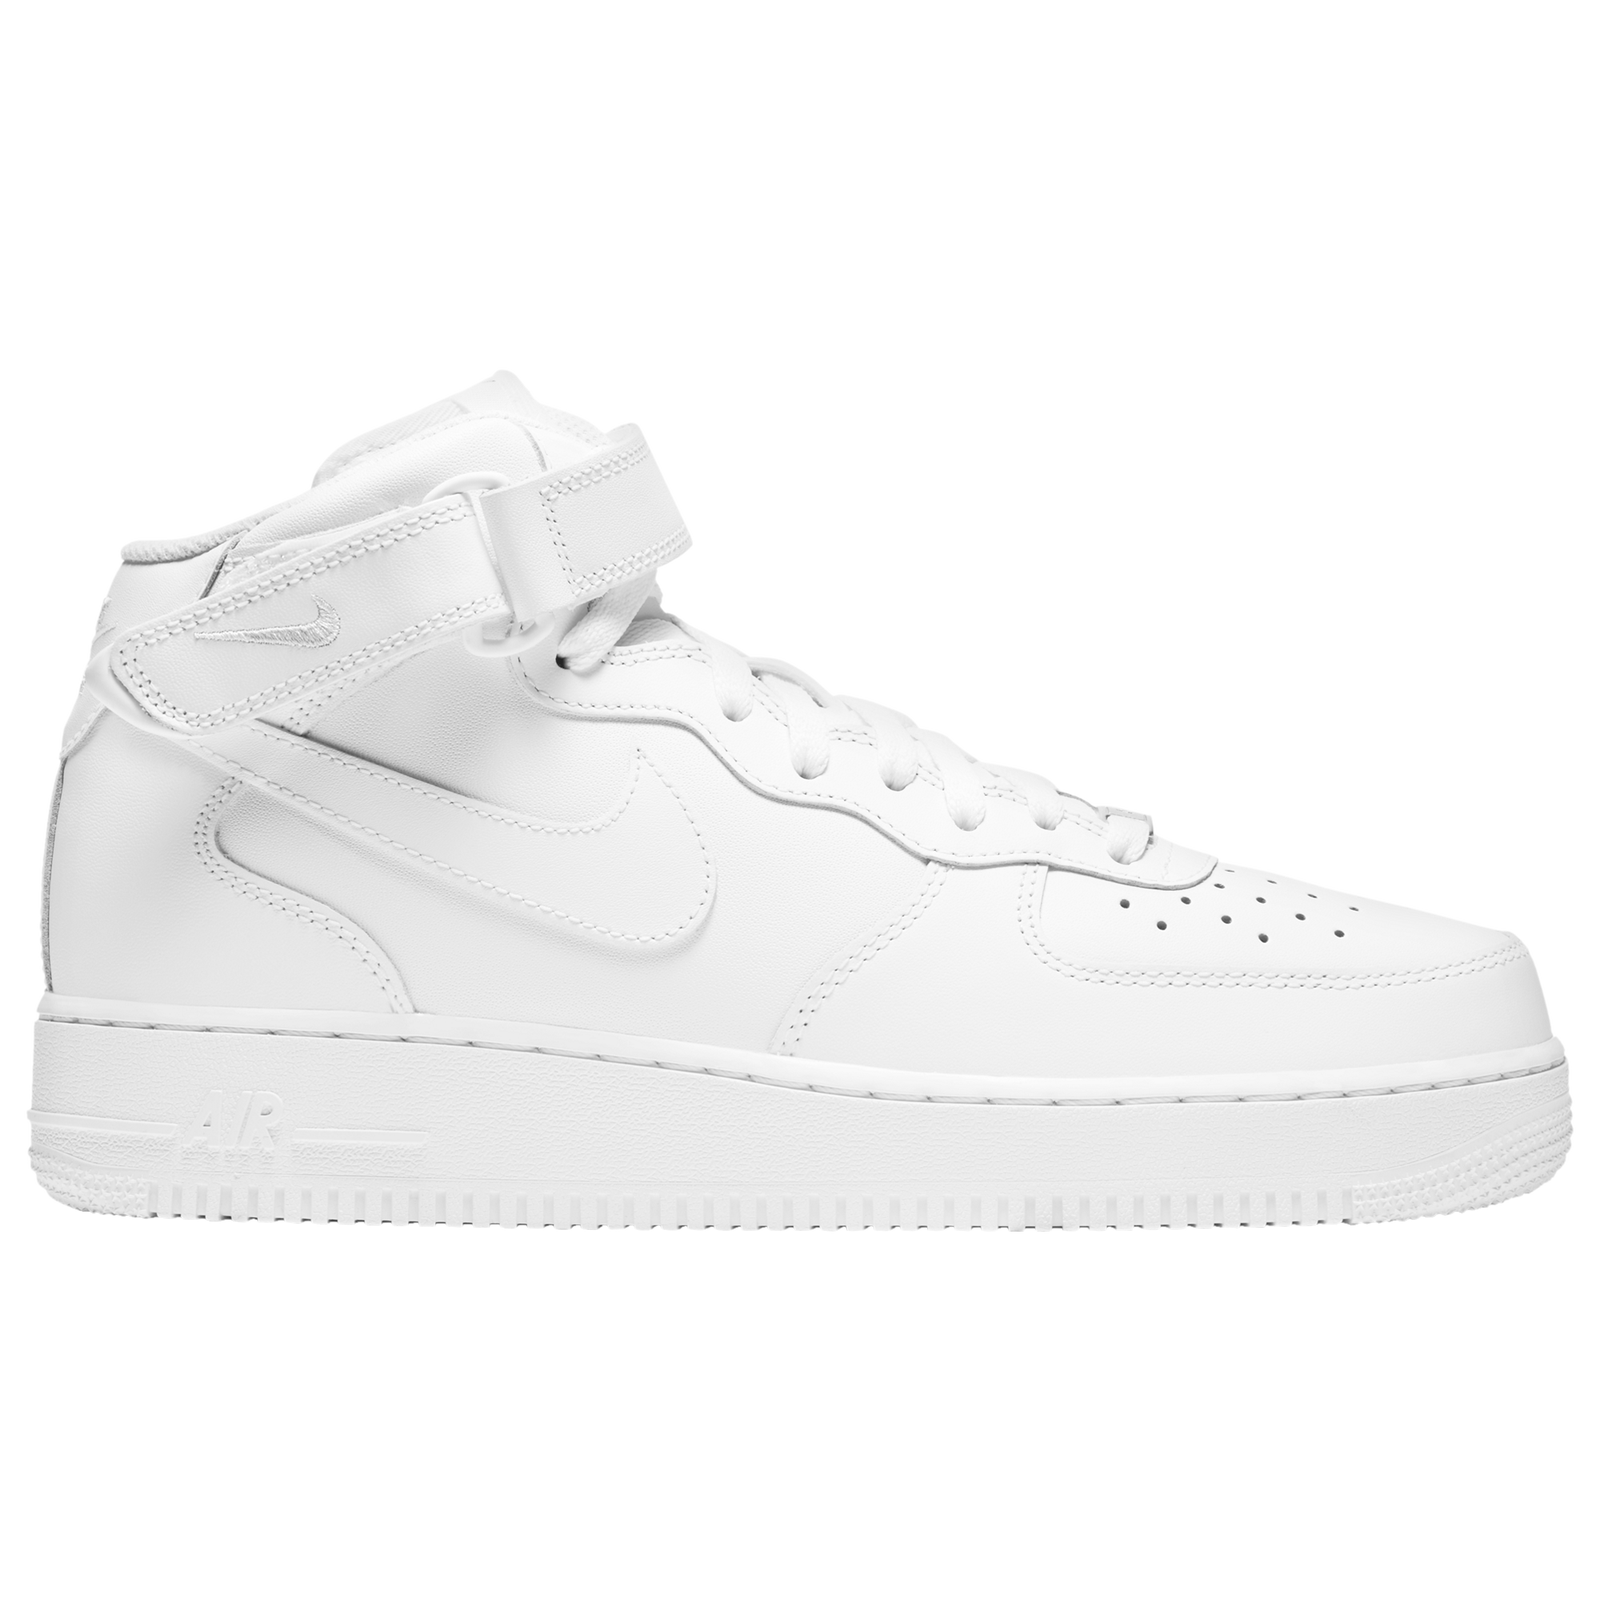 Size 17 - Nike Air Force 1 Mid '07 White CW2289-111 for sale online | eBay